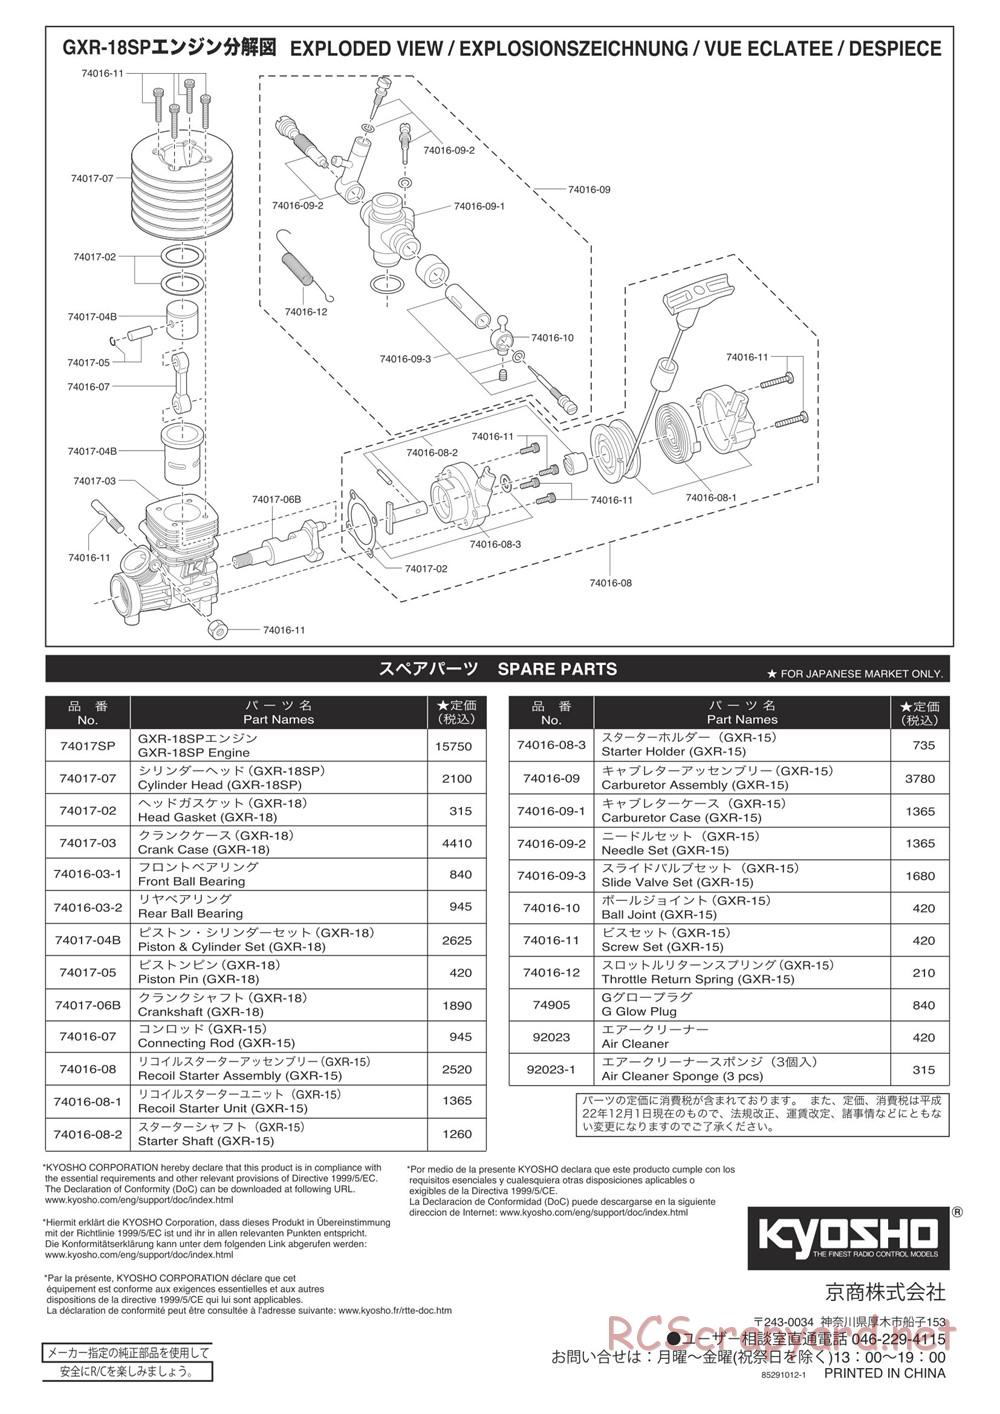 Kyosho - DMT - Manual - Page 20